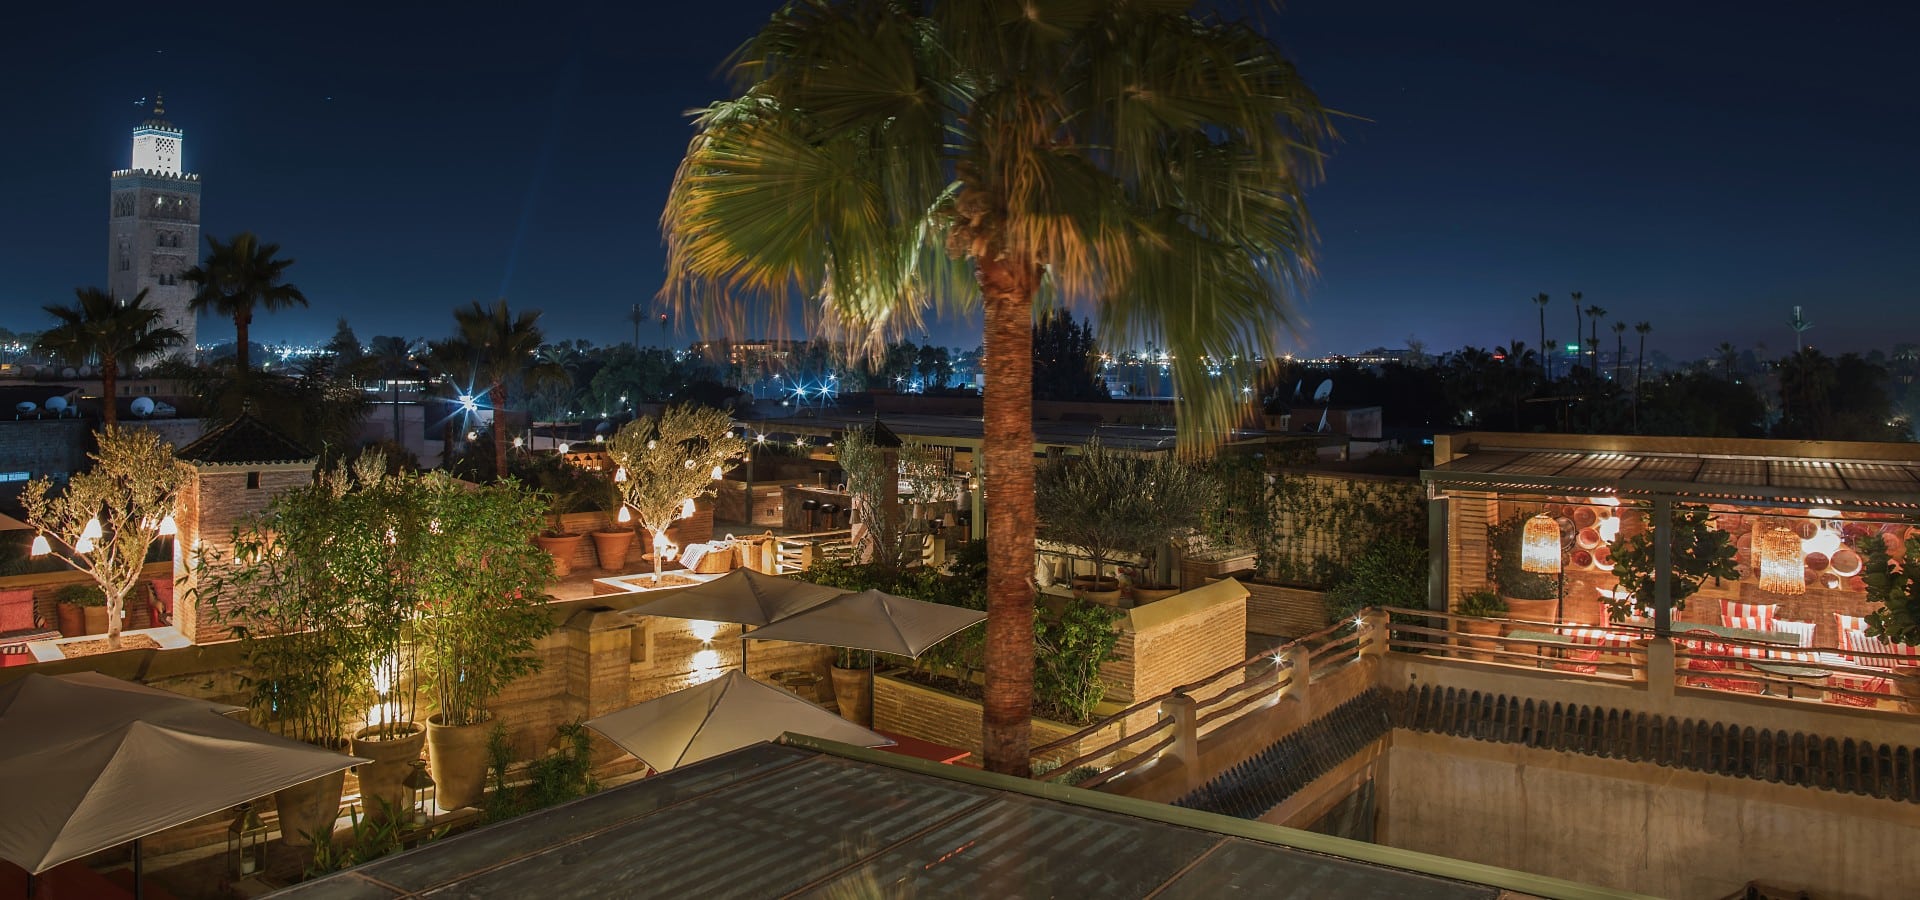 Marrakech comes alive at night in the summer - be a night owl